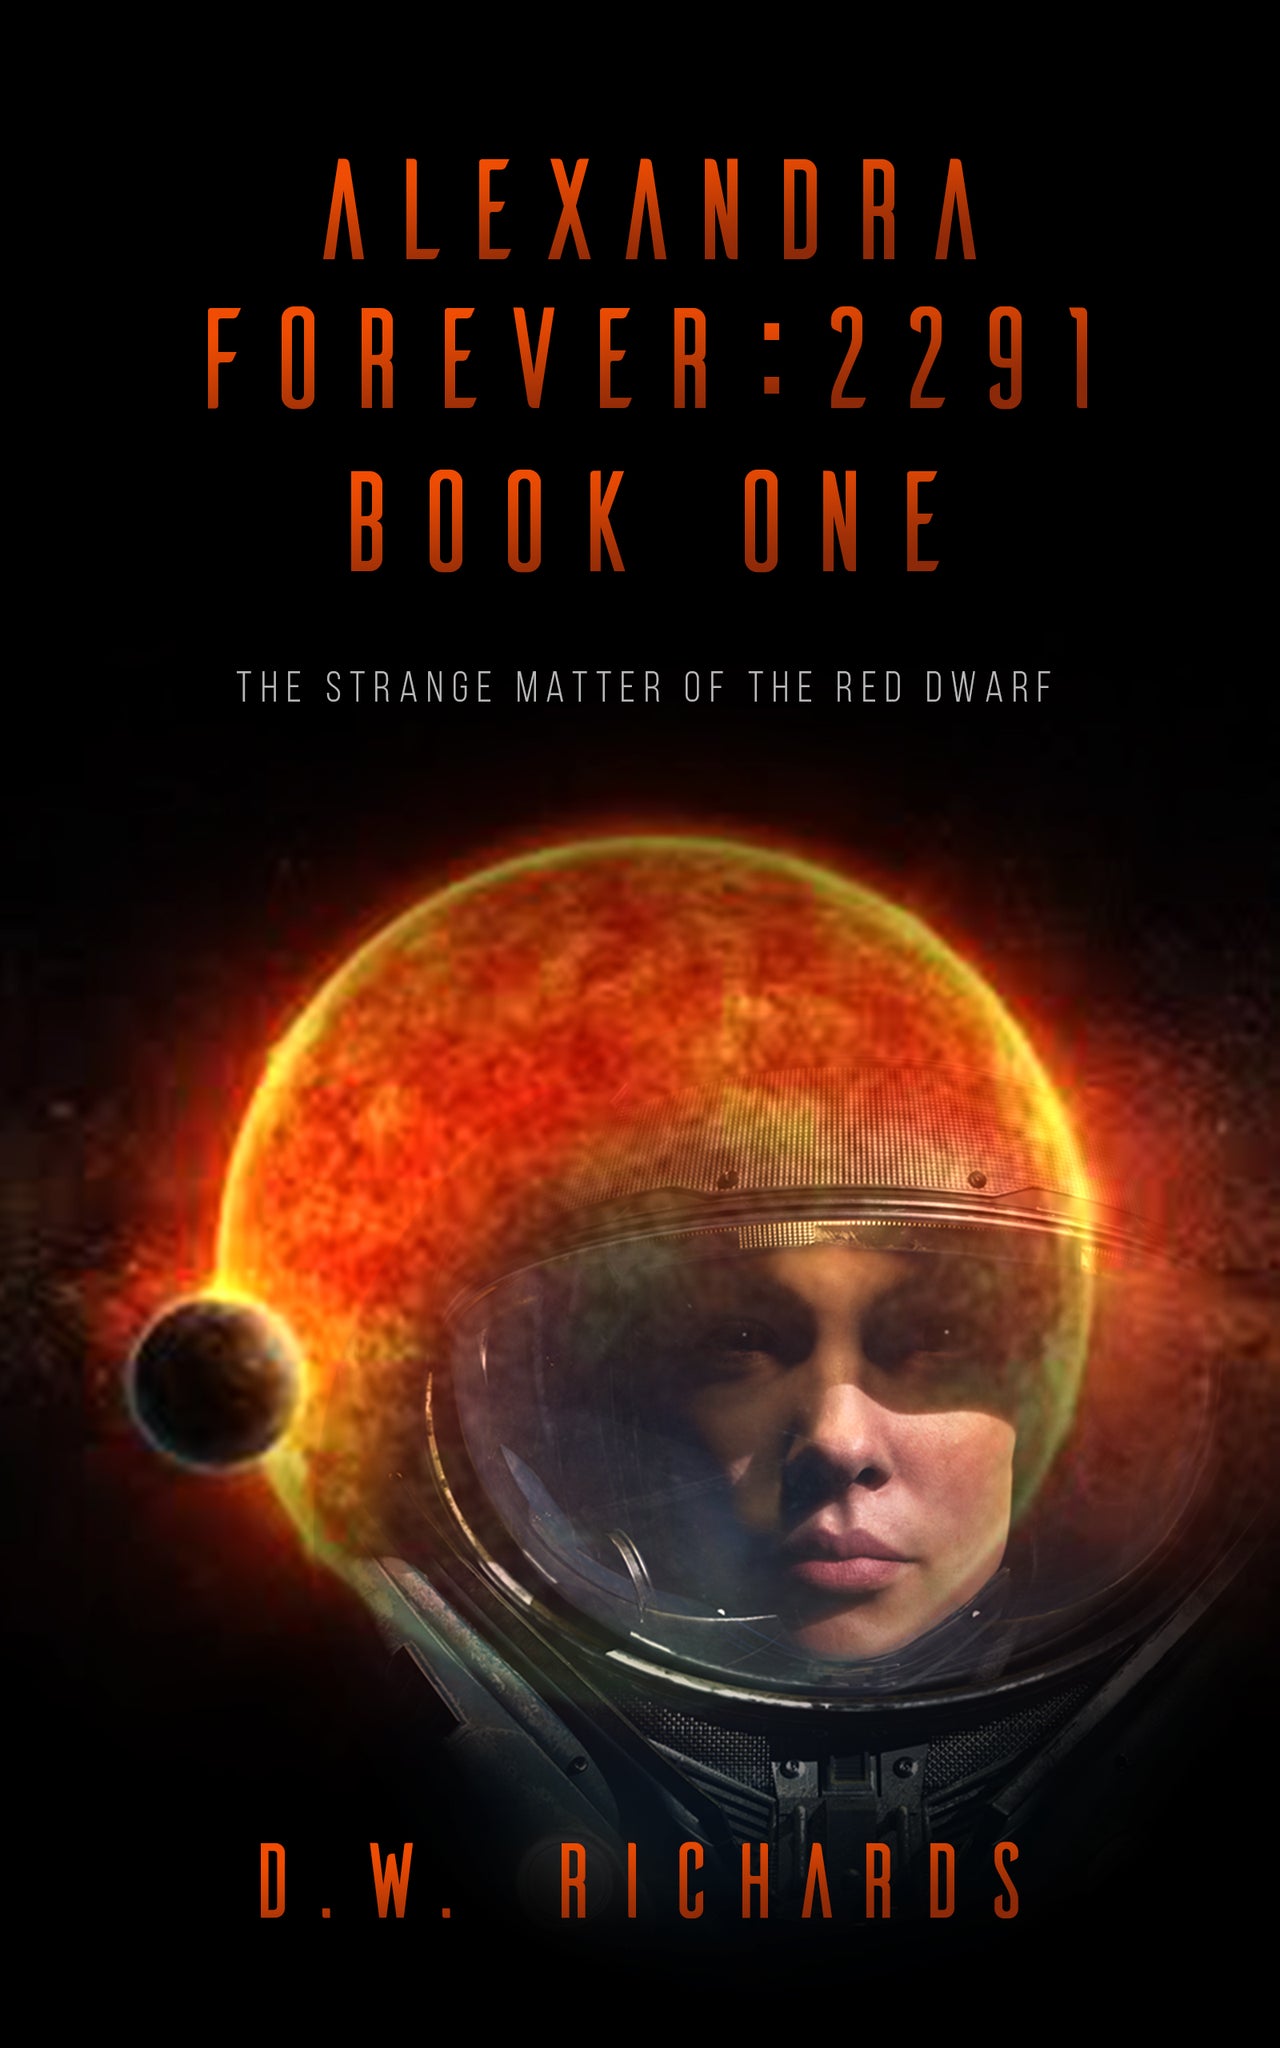 Alexandra Forever 2291 — Book One: The Strange Matter of the Red Dwarf (epub)